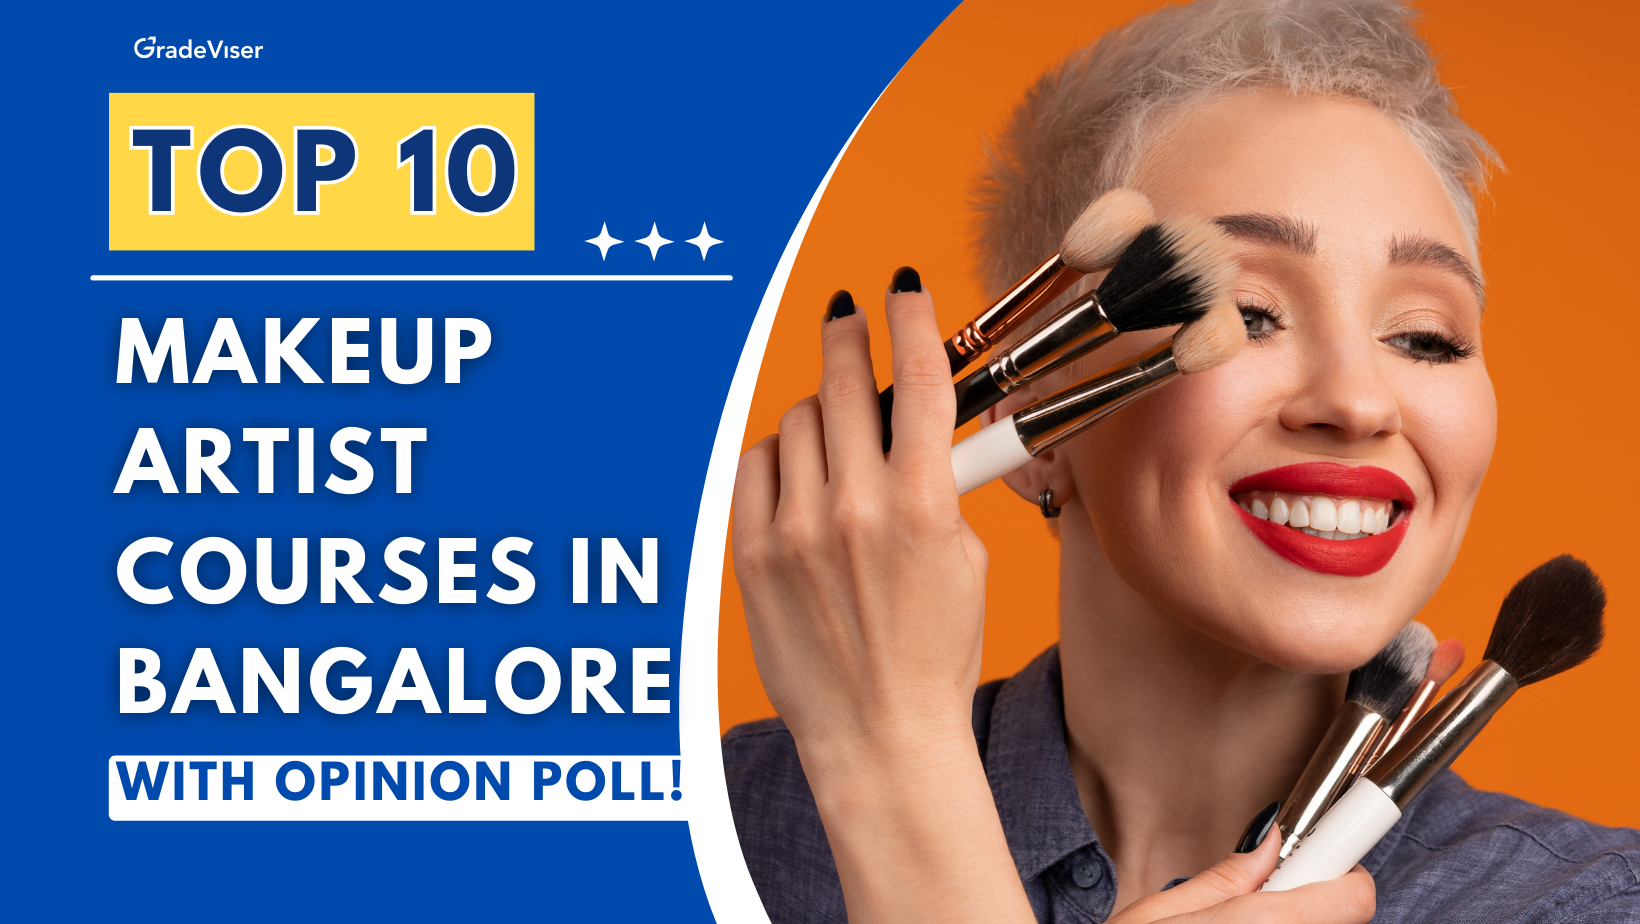 Makeup Artist Courses In Bangalore